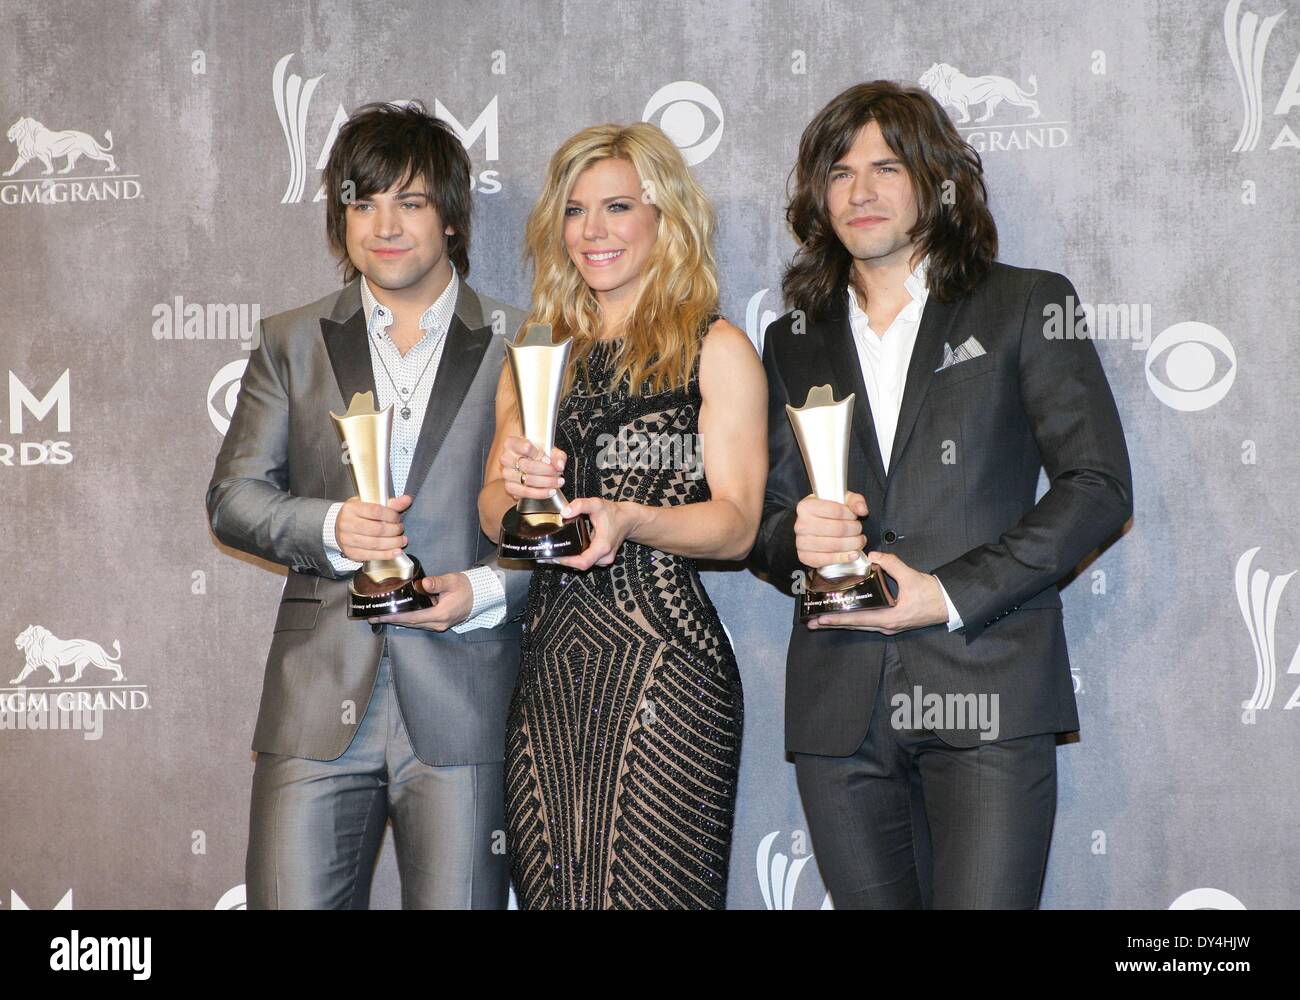 Los Angeles, CA, USA. 6. April 2014. Neil Perry, Kimberly Perry, Reid Perry, The Band Perry im Presseraum für 49th Annual Academy of Country Music (ACM) Awards 2014 - Press Room, MGM Grand Garden Arena, Los Angeles, CA 6. April 2014. Bildnachweis: James Atoa/Everett Collection/Alamy Live-Nachrichten Stockfoto